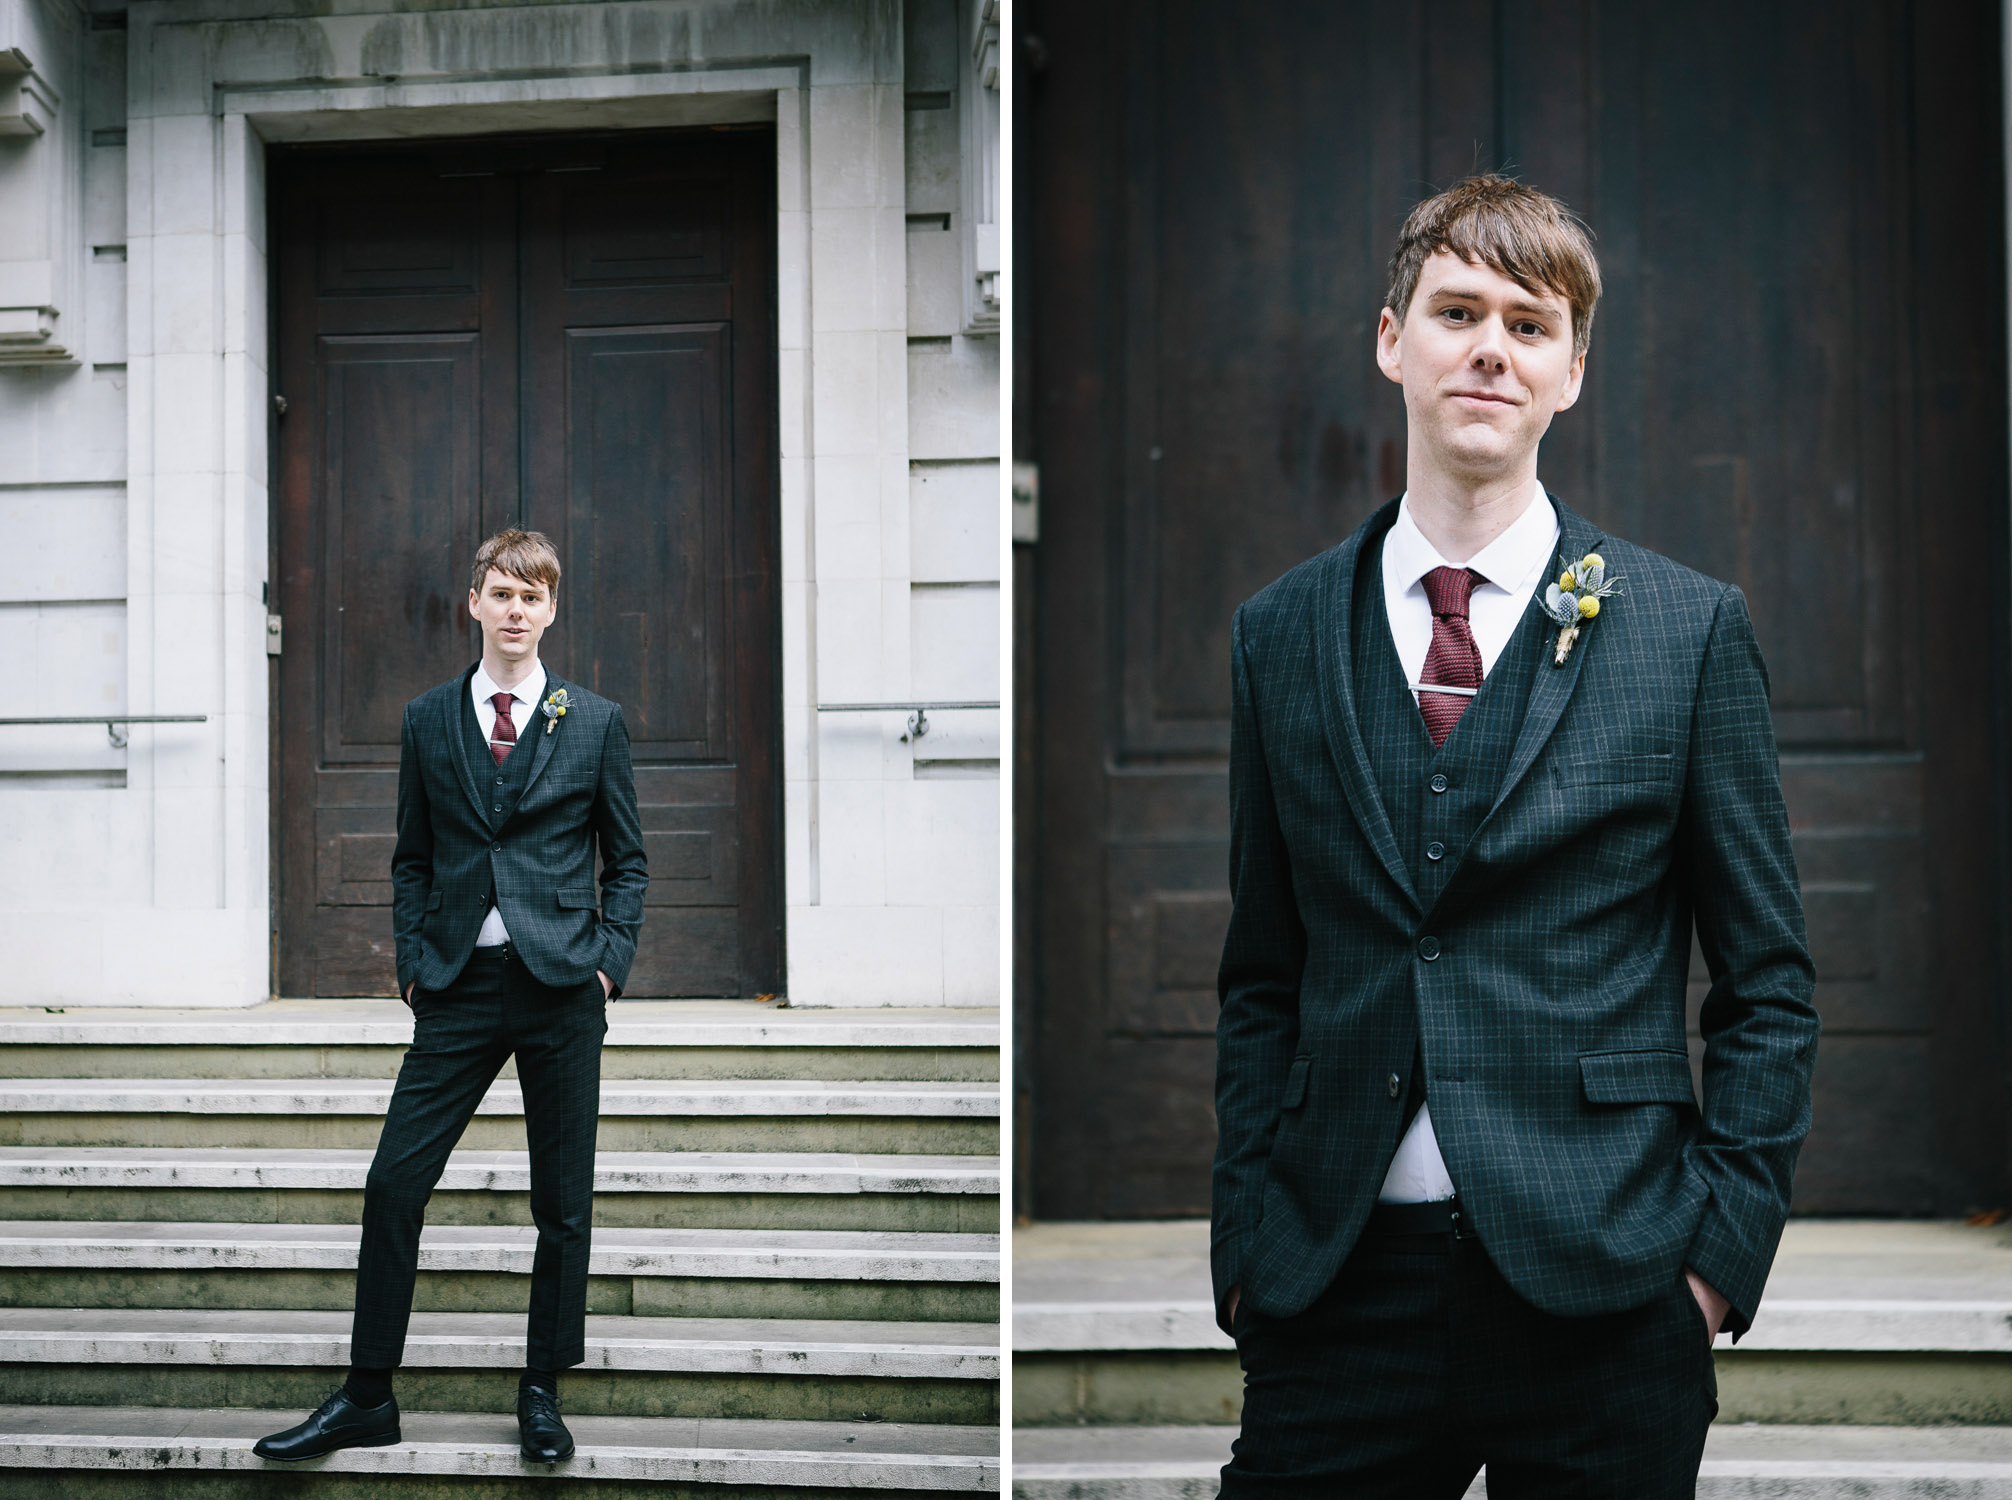 Portraits of Peter outside Hackney Town Hall